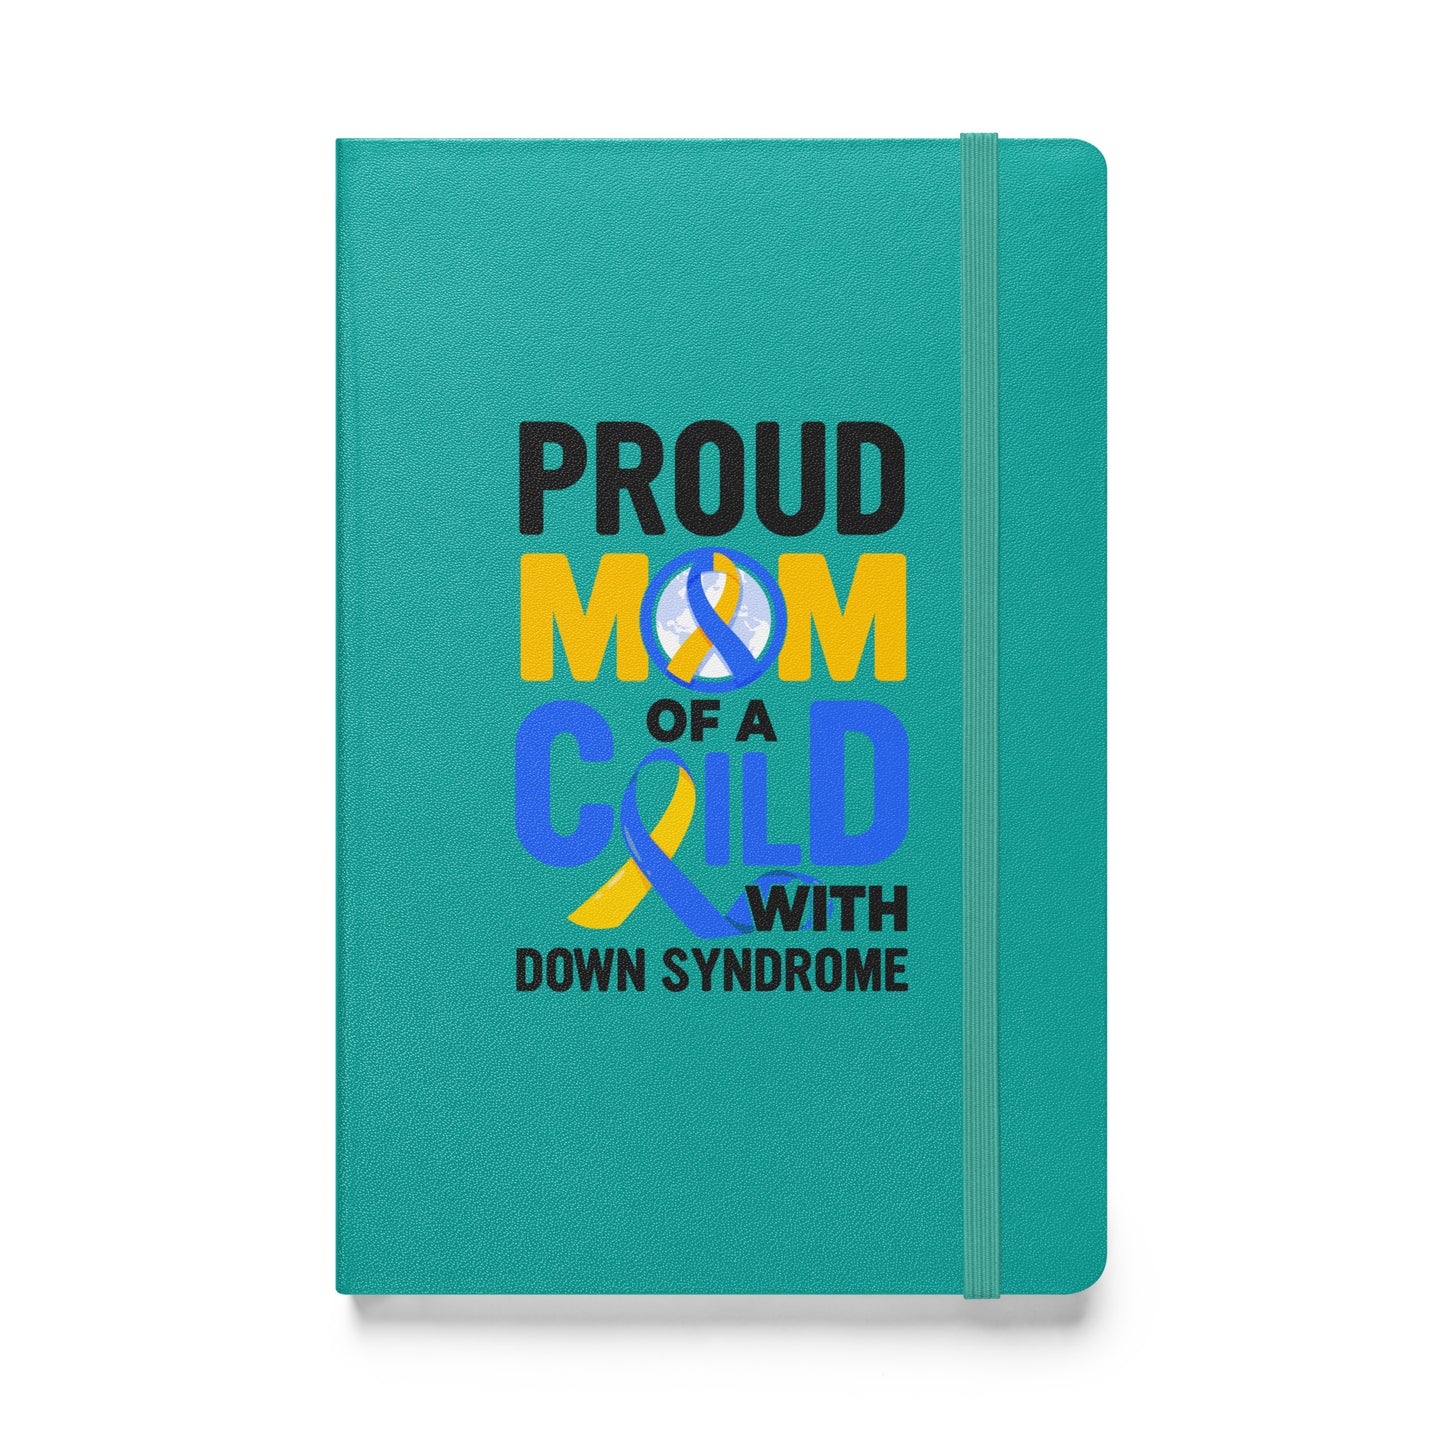 Down Syndrome Awareness Hardcover Bound Journal